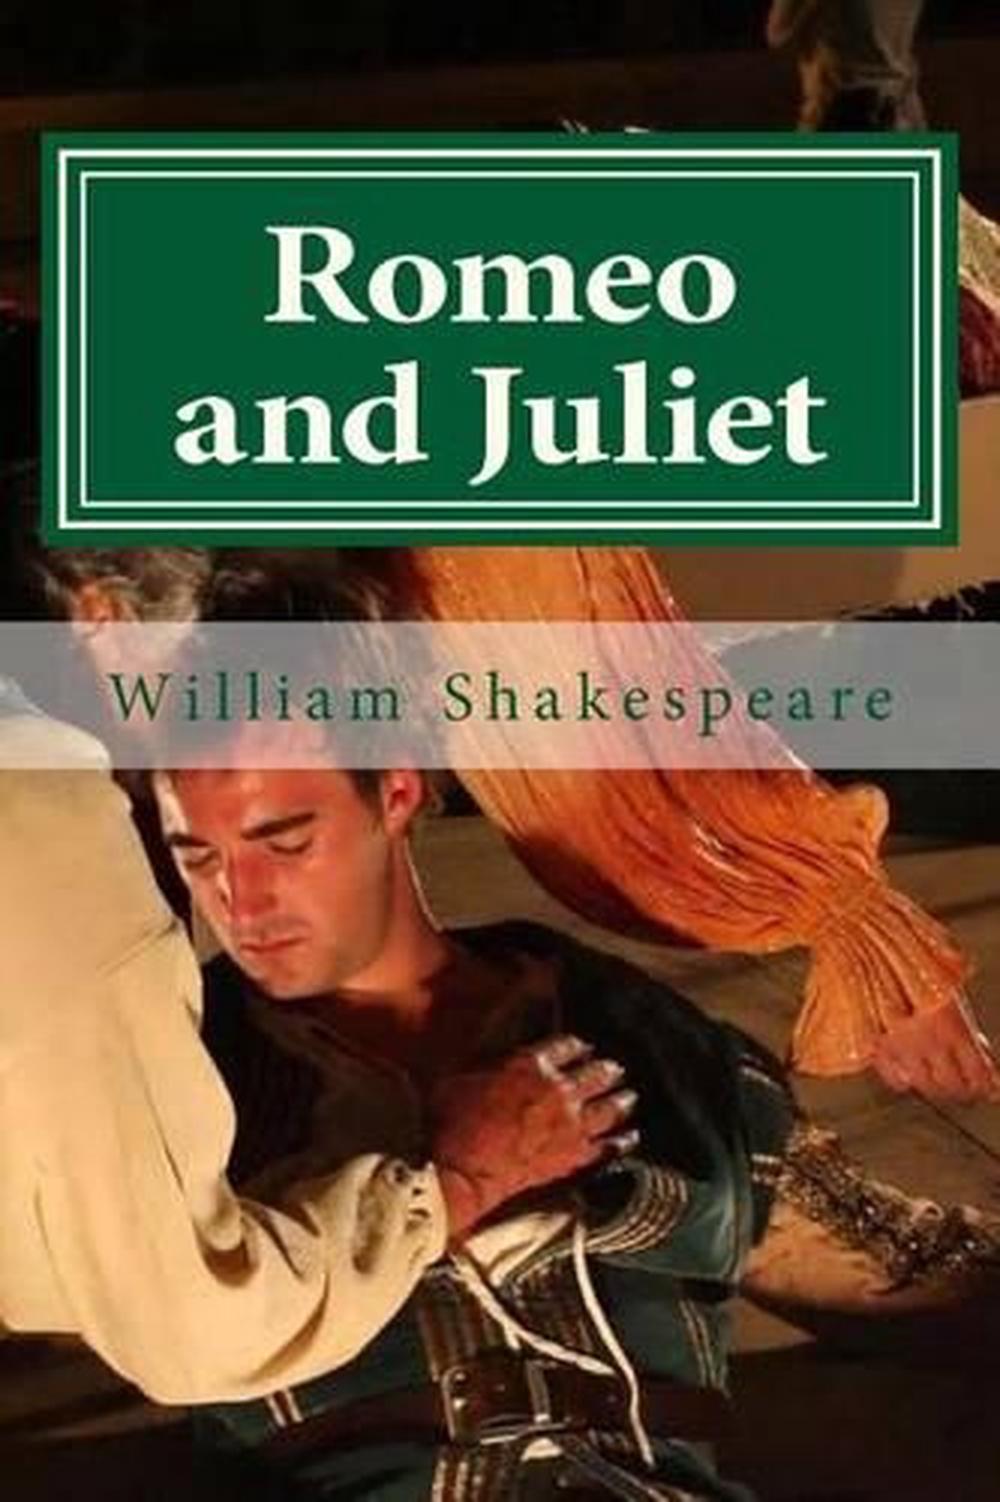 the story of romeo and juliet by william shakespeare